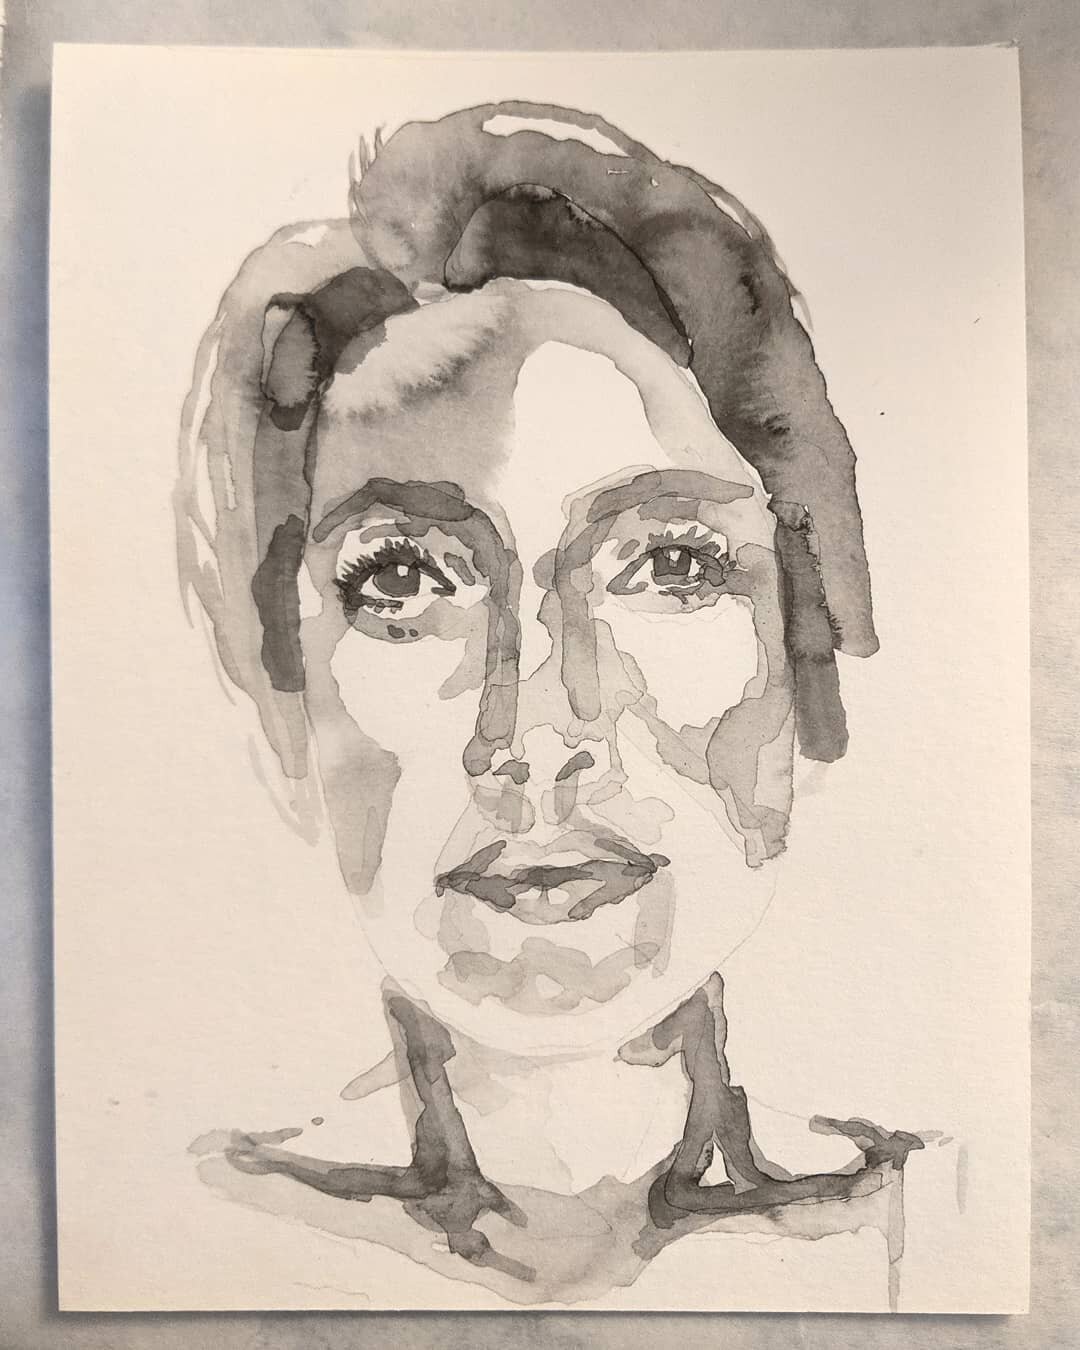 Postcard Number 30.
These postcards are always a gift of a little bit of myself going out to you... This one maybe a little bit more straightforwardly so. This self-portrait is an exploration in letting the medium (ink) do its thing. Allowing the ink